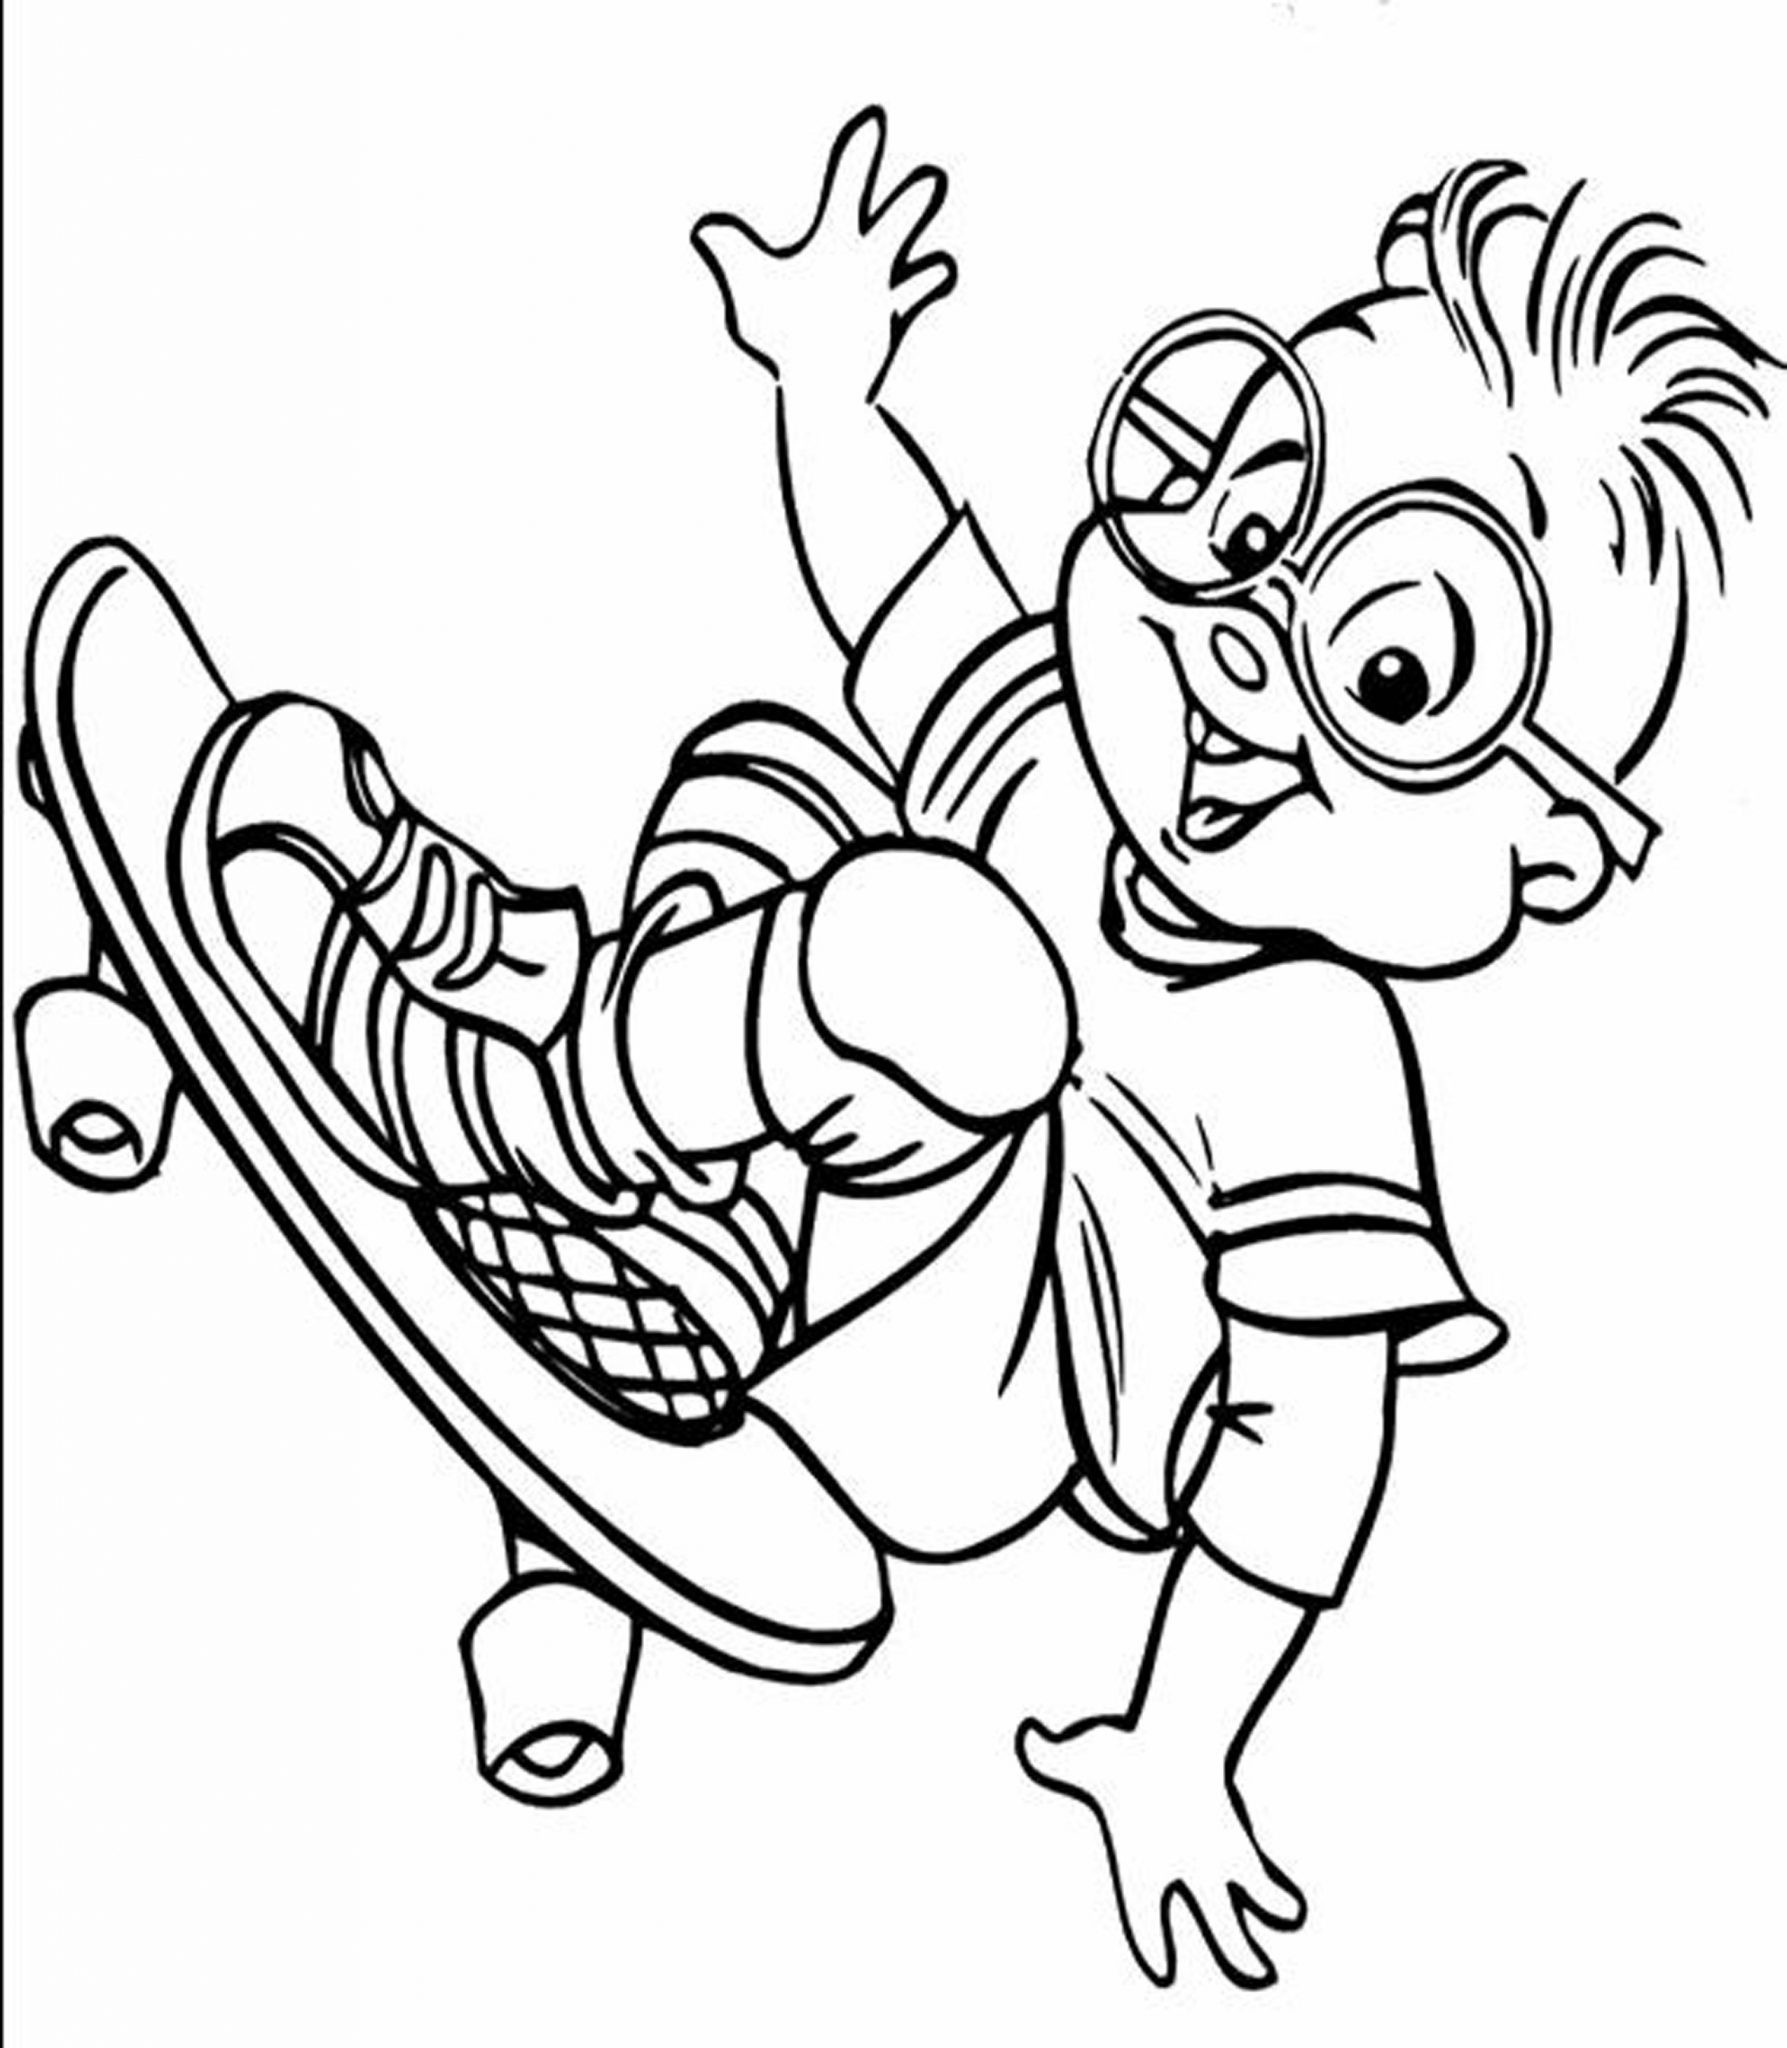 Coloring Sheets For Boys
 Coloring Pages for Boys & Training Shopping For Children